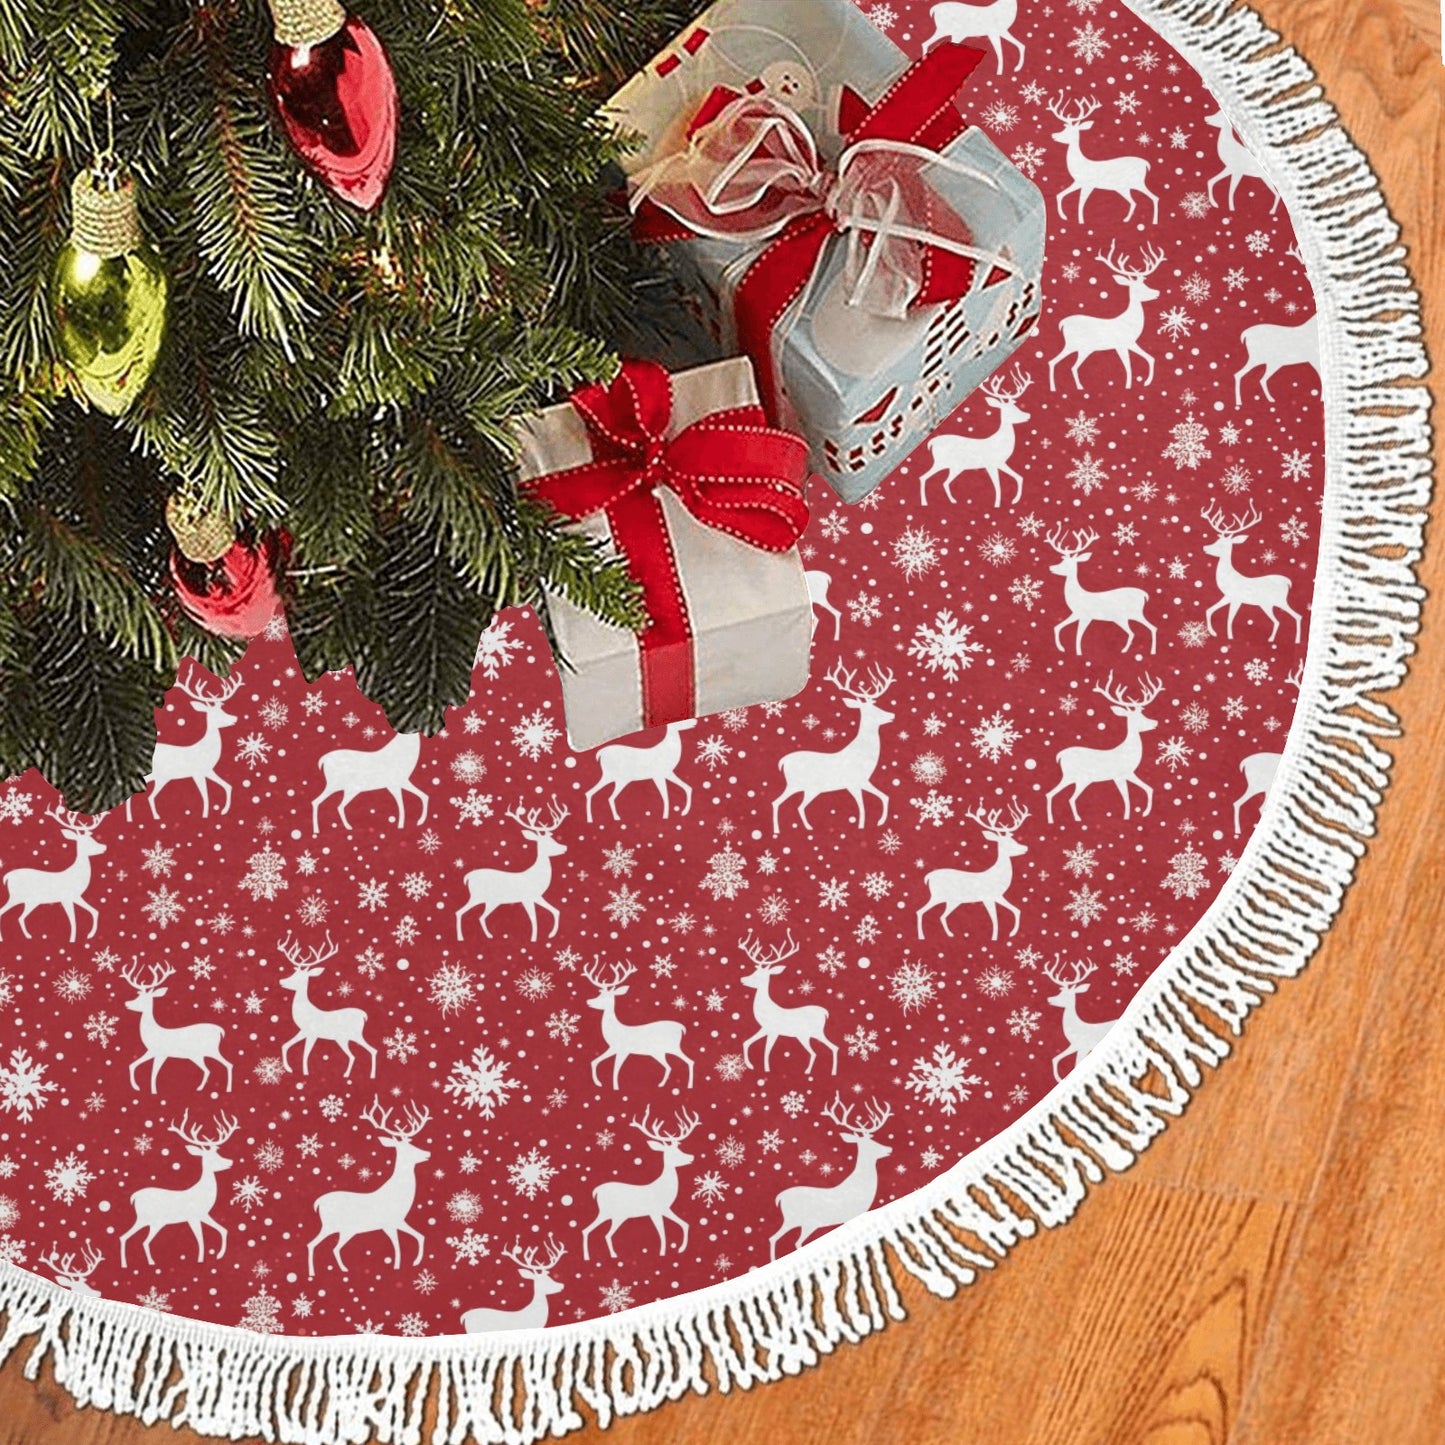 Red White Christmas Tree Skirt with Fringe, Snowflakes Reindeer Vintage Xmas Cover Decor Decoration 30 36 48 60 Inch Small Large Party